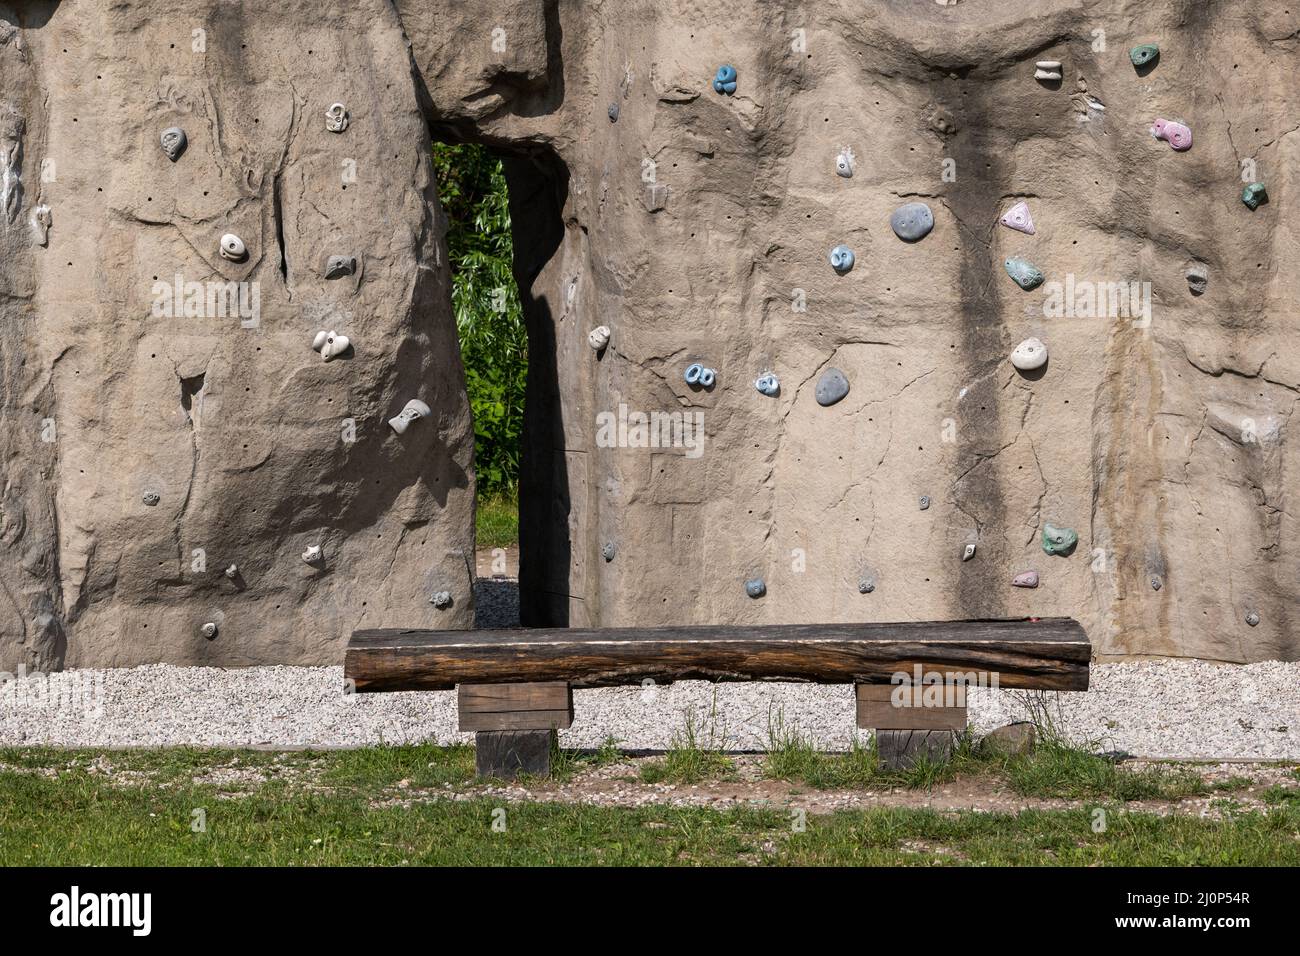 Climbing wall in urban park, manmade rock with holds and grips. Stock Photo